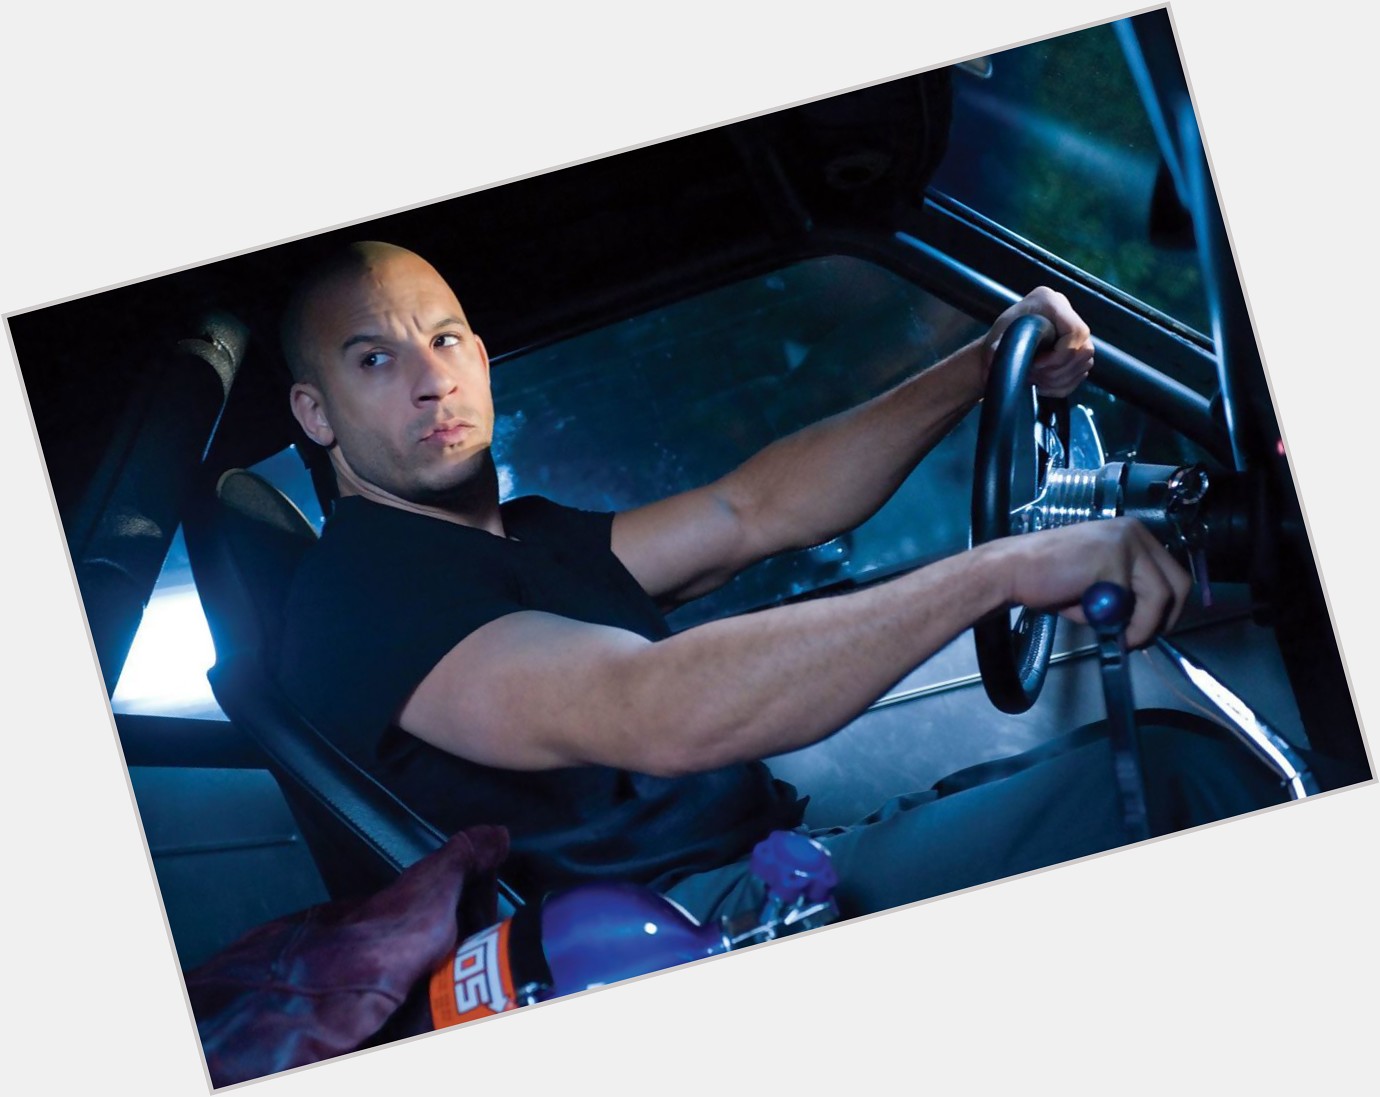 Happy Birthday Vin Diesel!
Celebrating his 54th birthday today!
To the man who taught us all about family.        